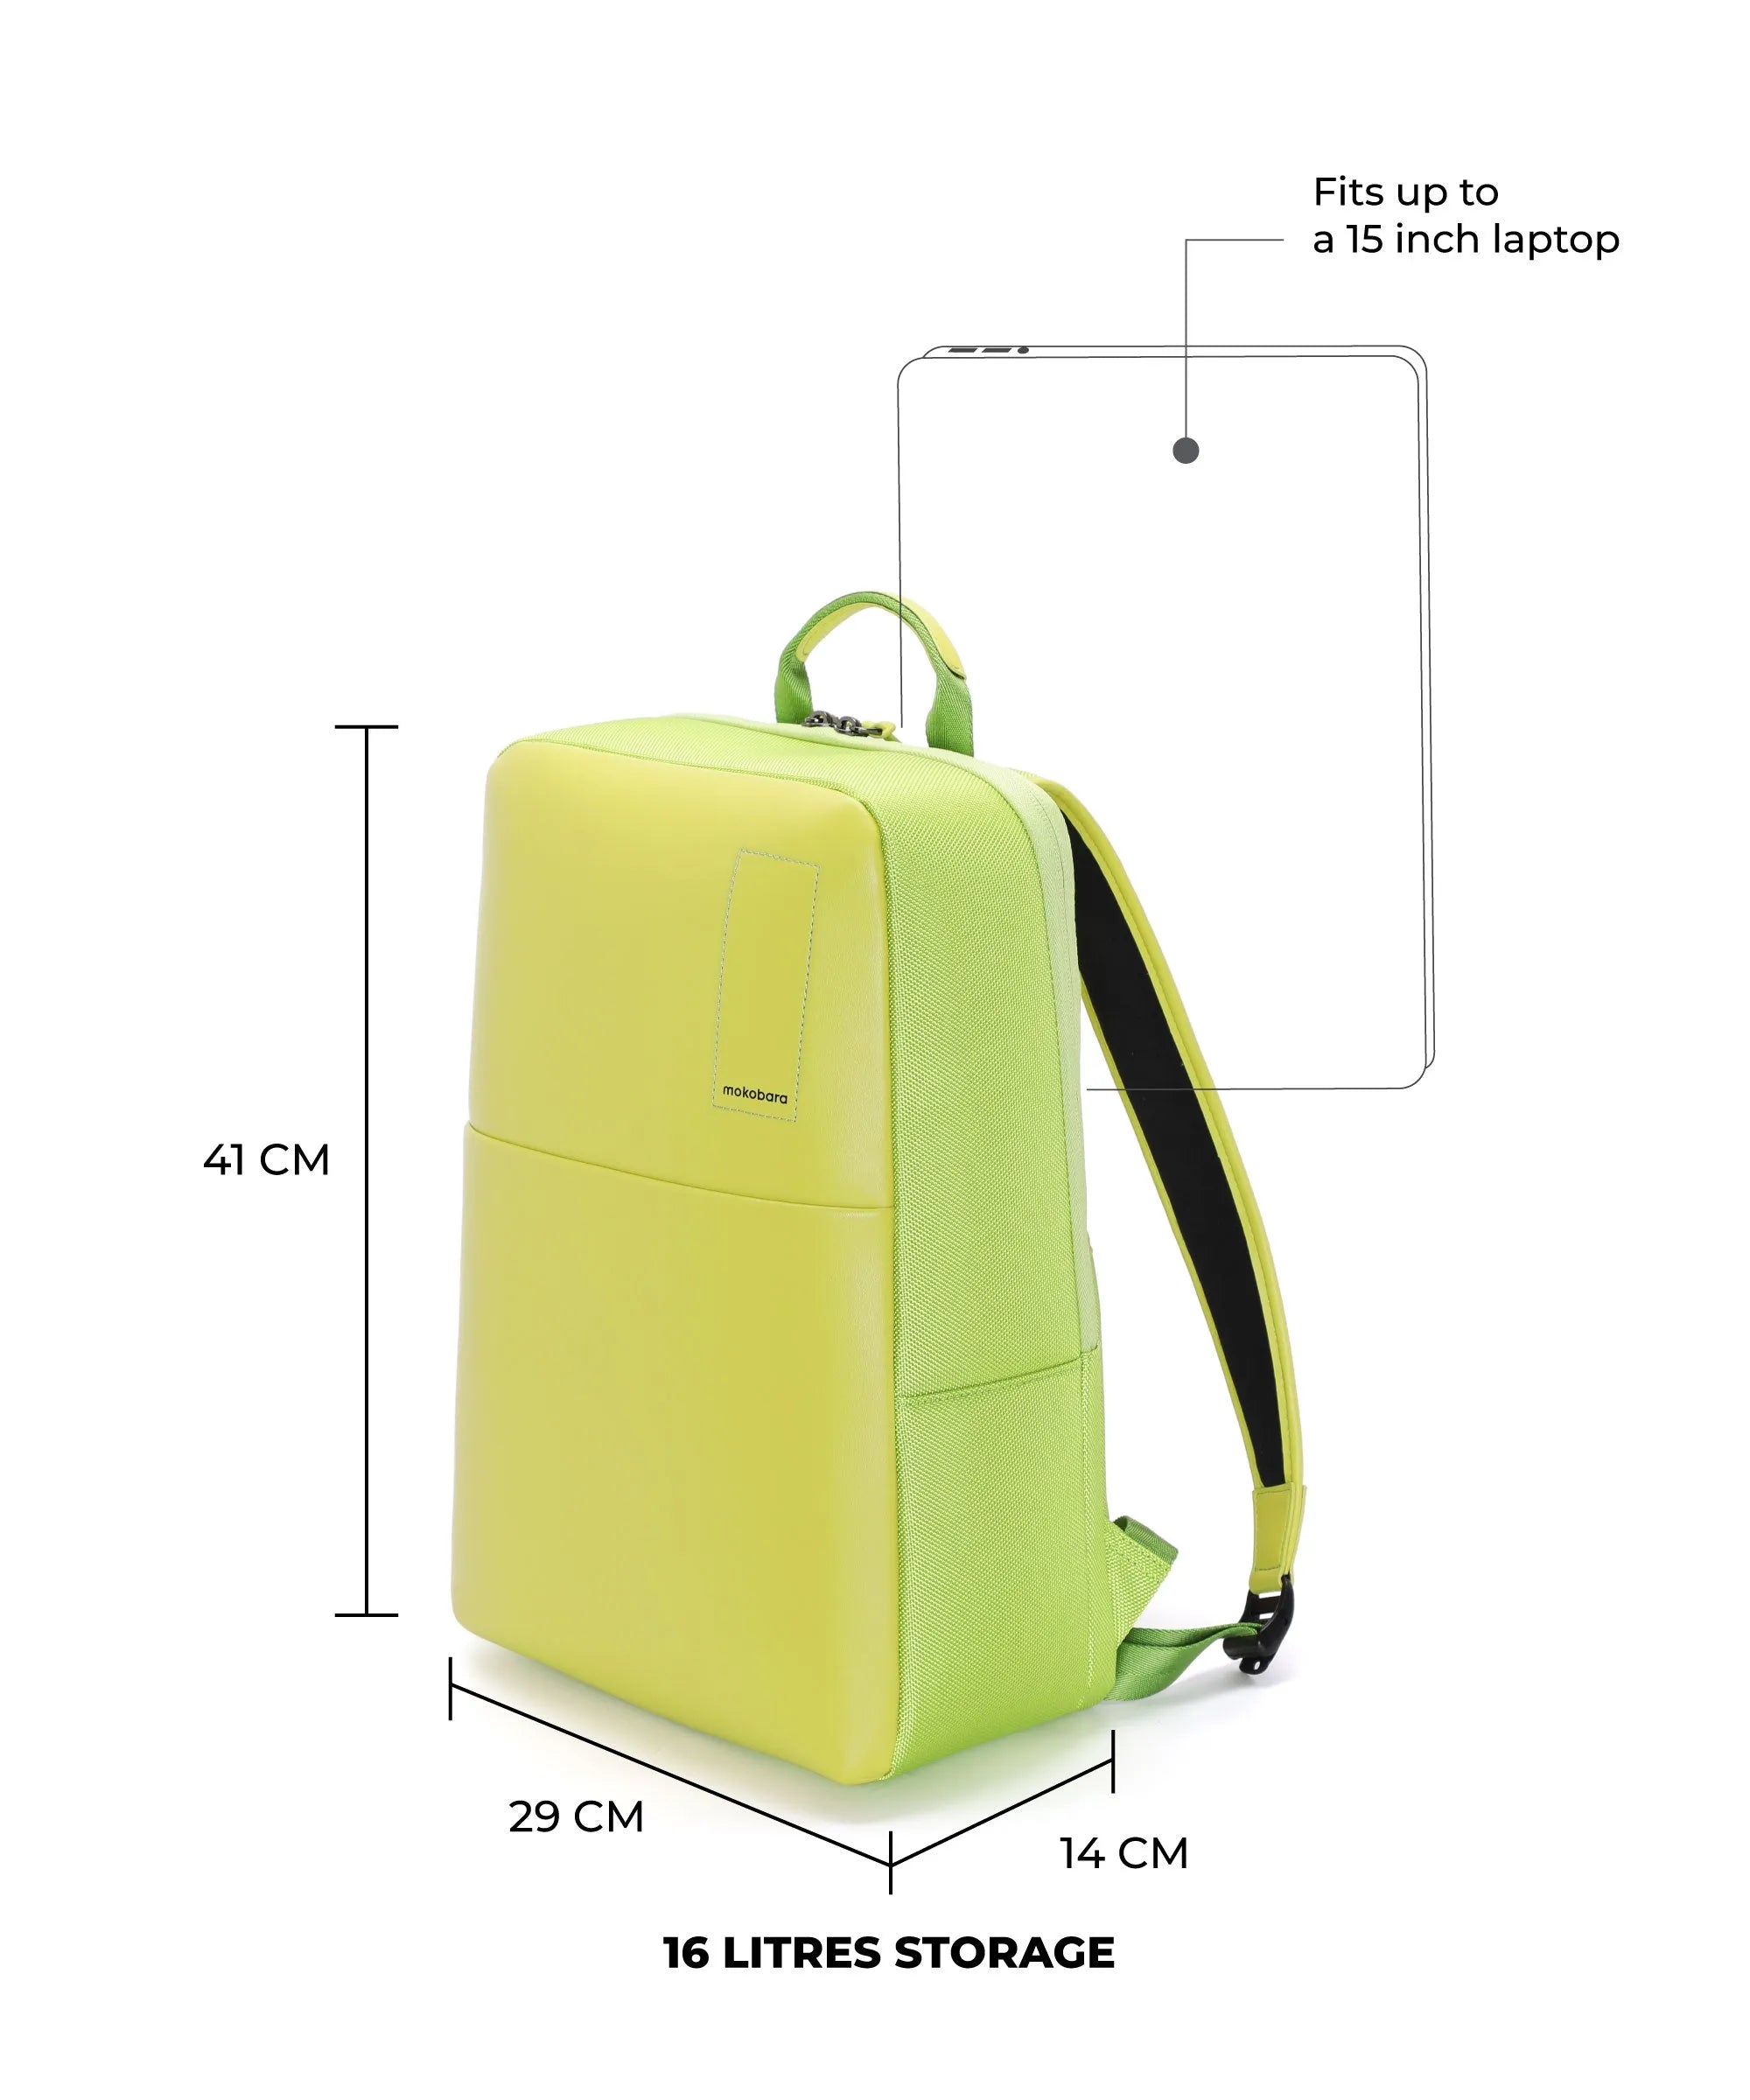 Color_Happy Green | The Backpack